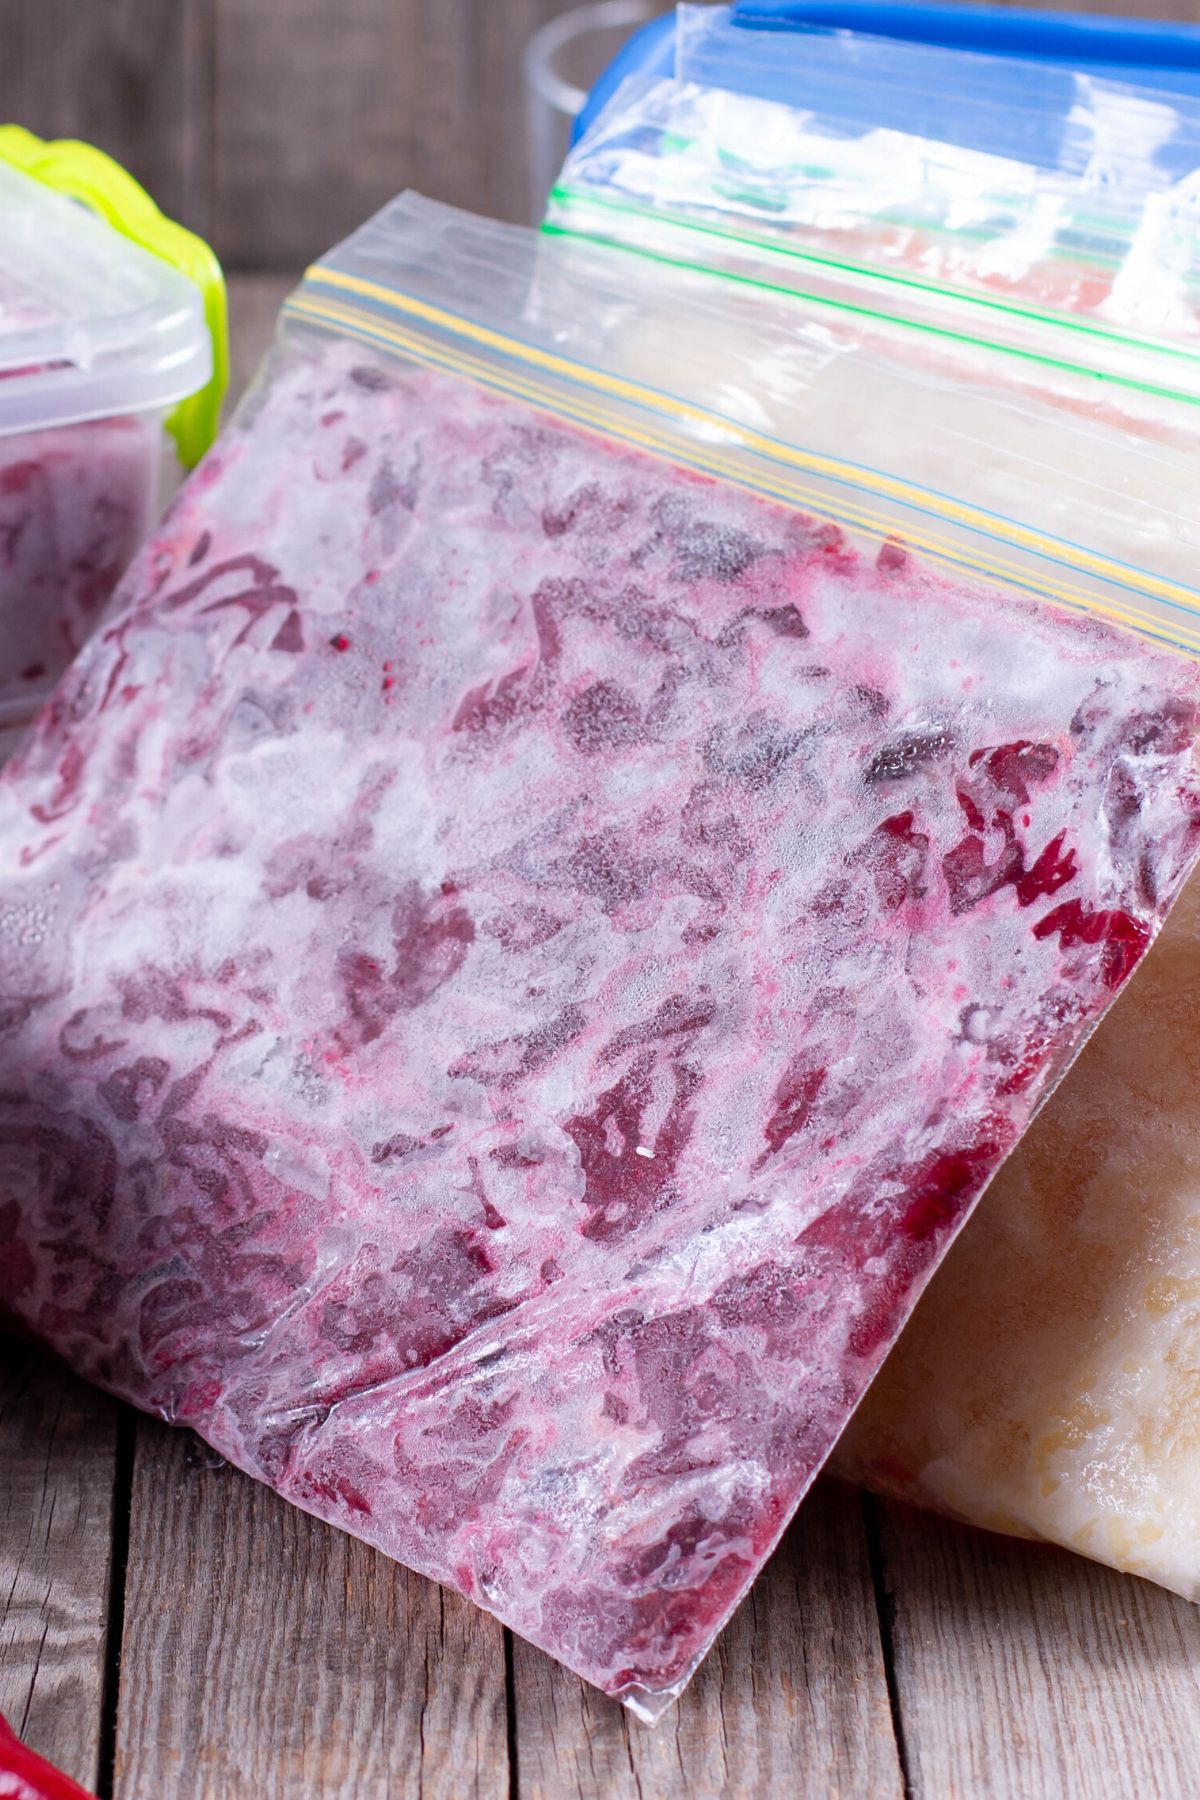 Baggies and containers of frozen shredded beets.